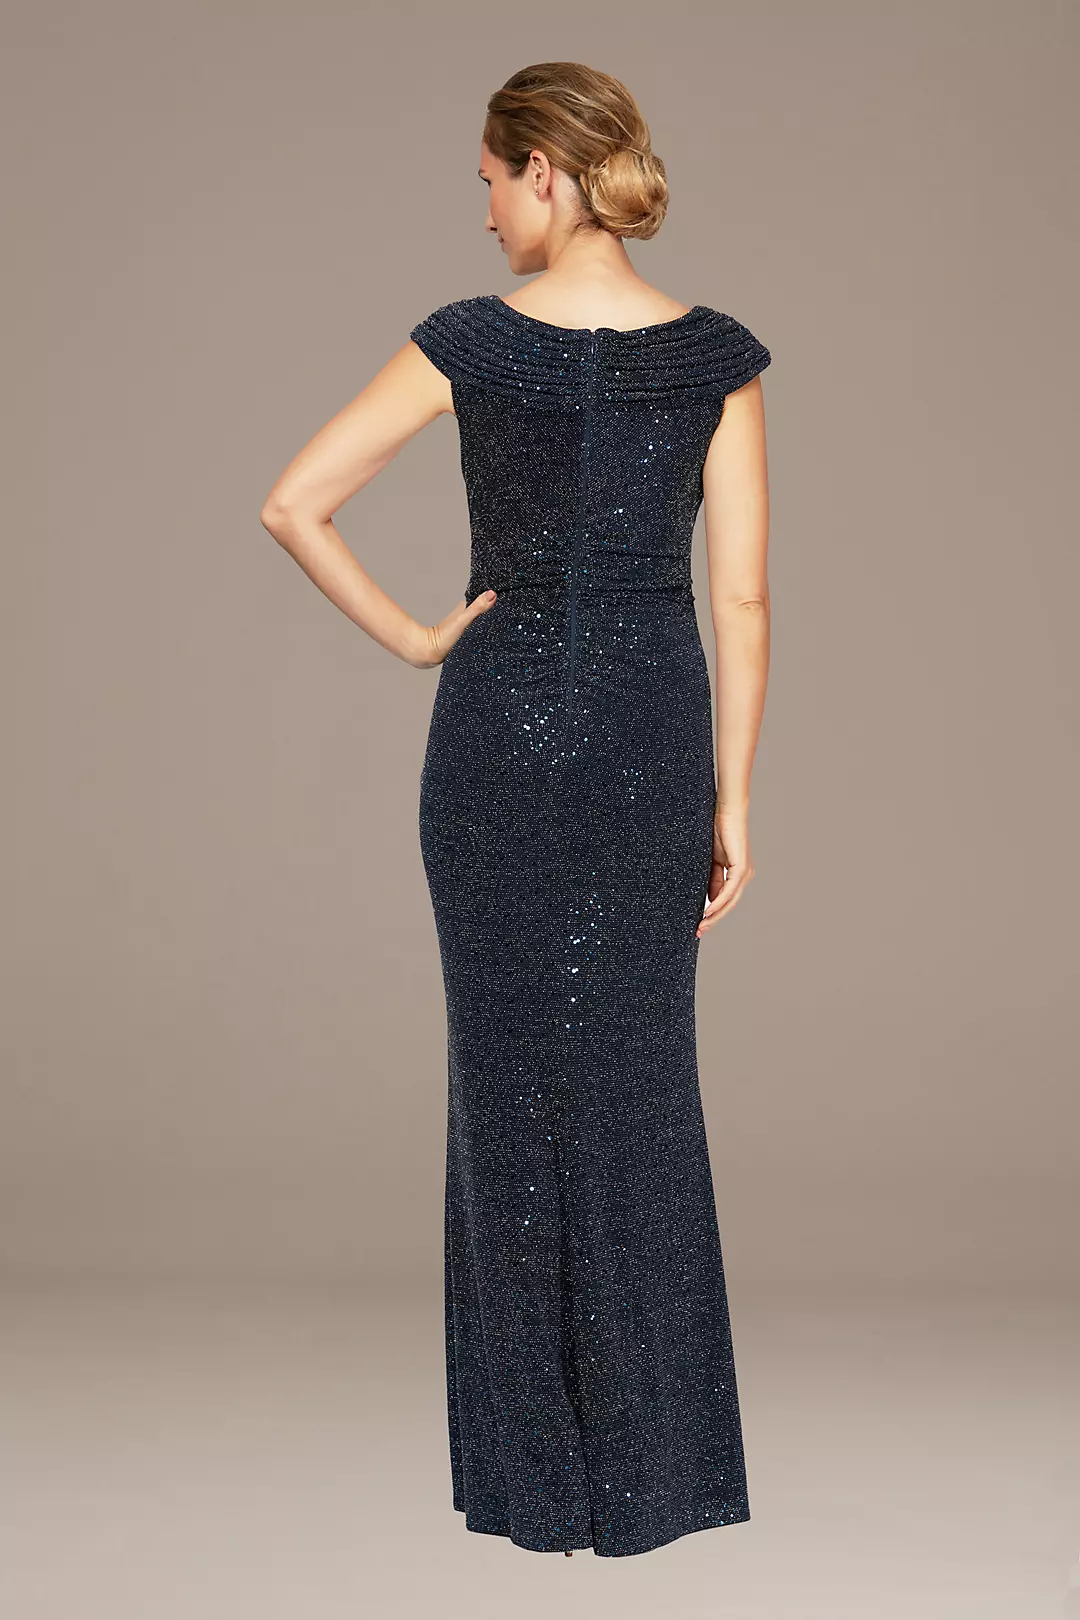 Asymmetrical Sequin and Metallic Gown with Slit Image 2